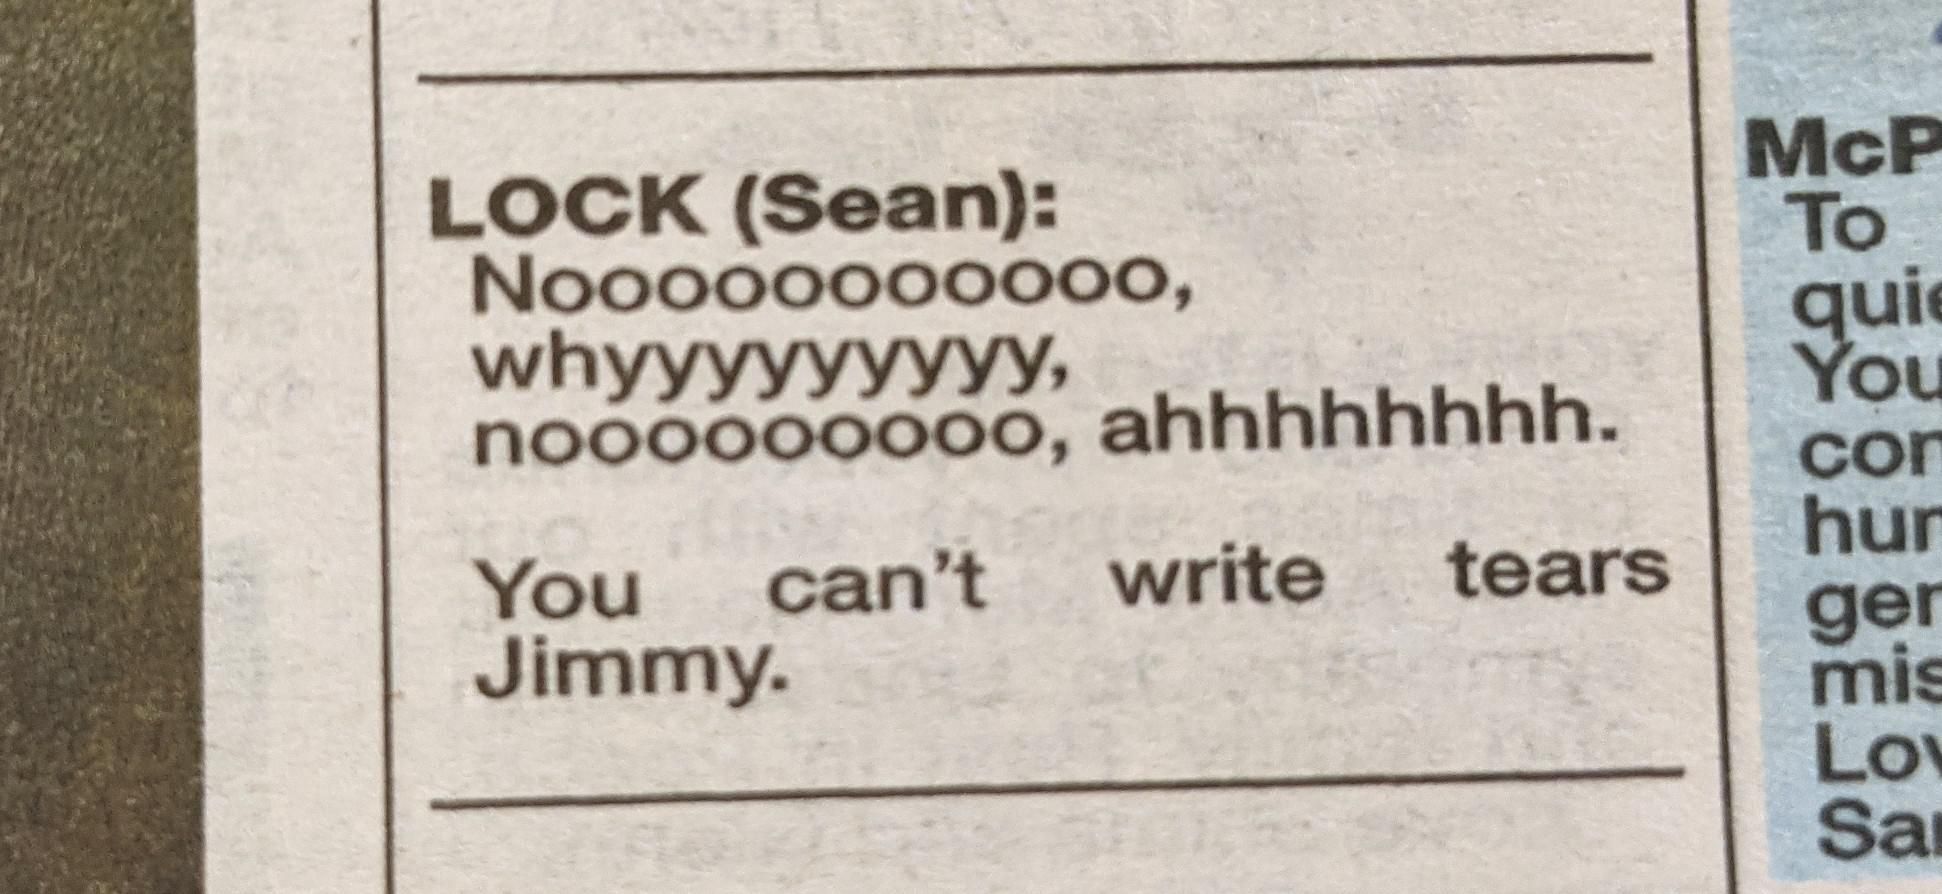 Sean Lock's obituary wishes come true in the West Australian today